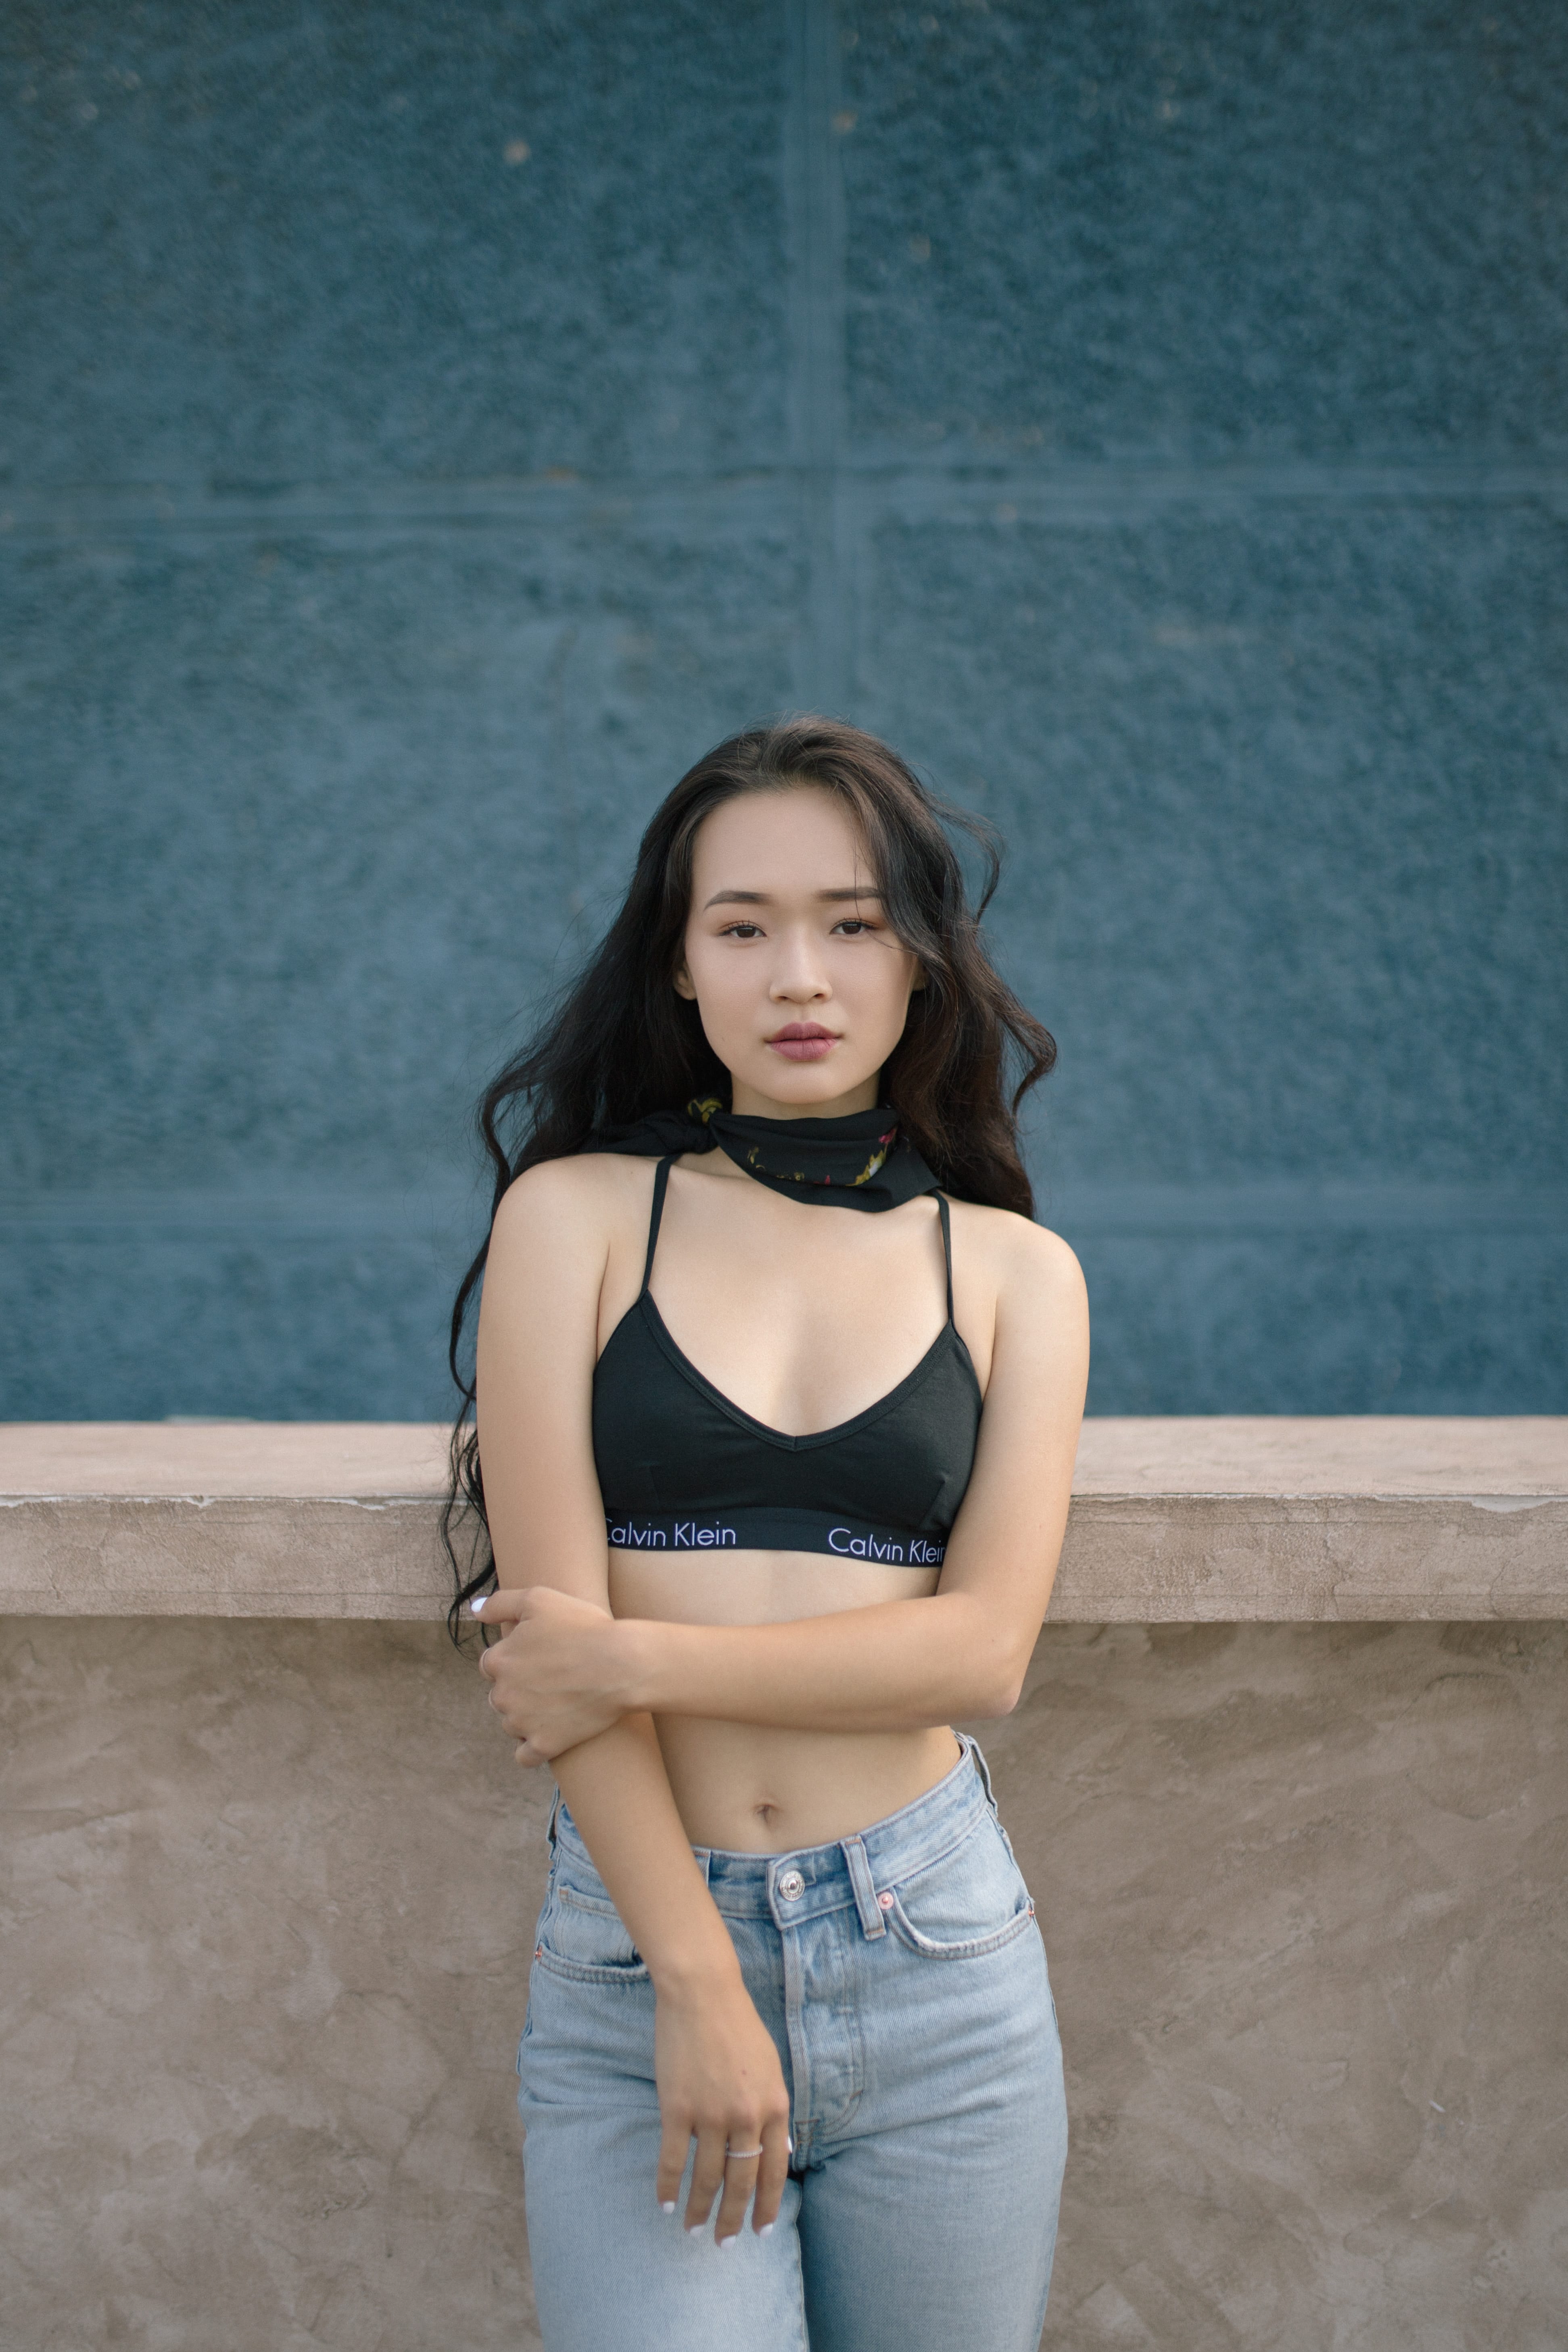 From Bangkok to the World: The Ascent of Thai Amateur Models on the Global Stage